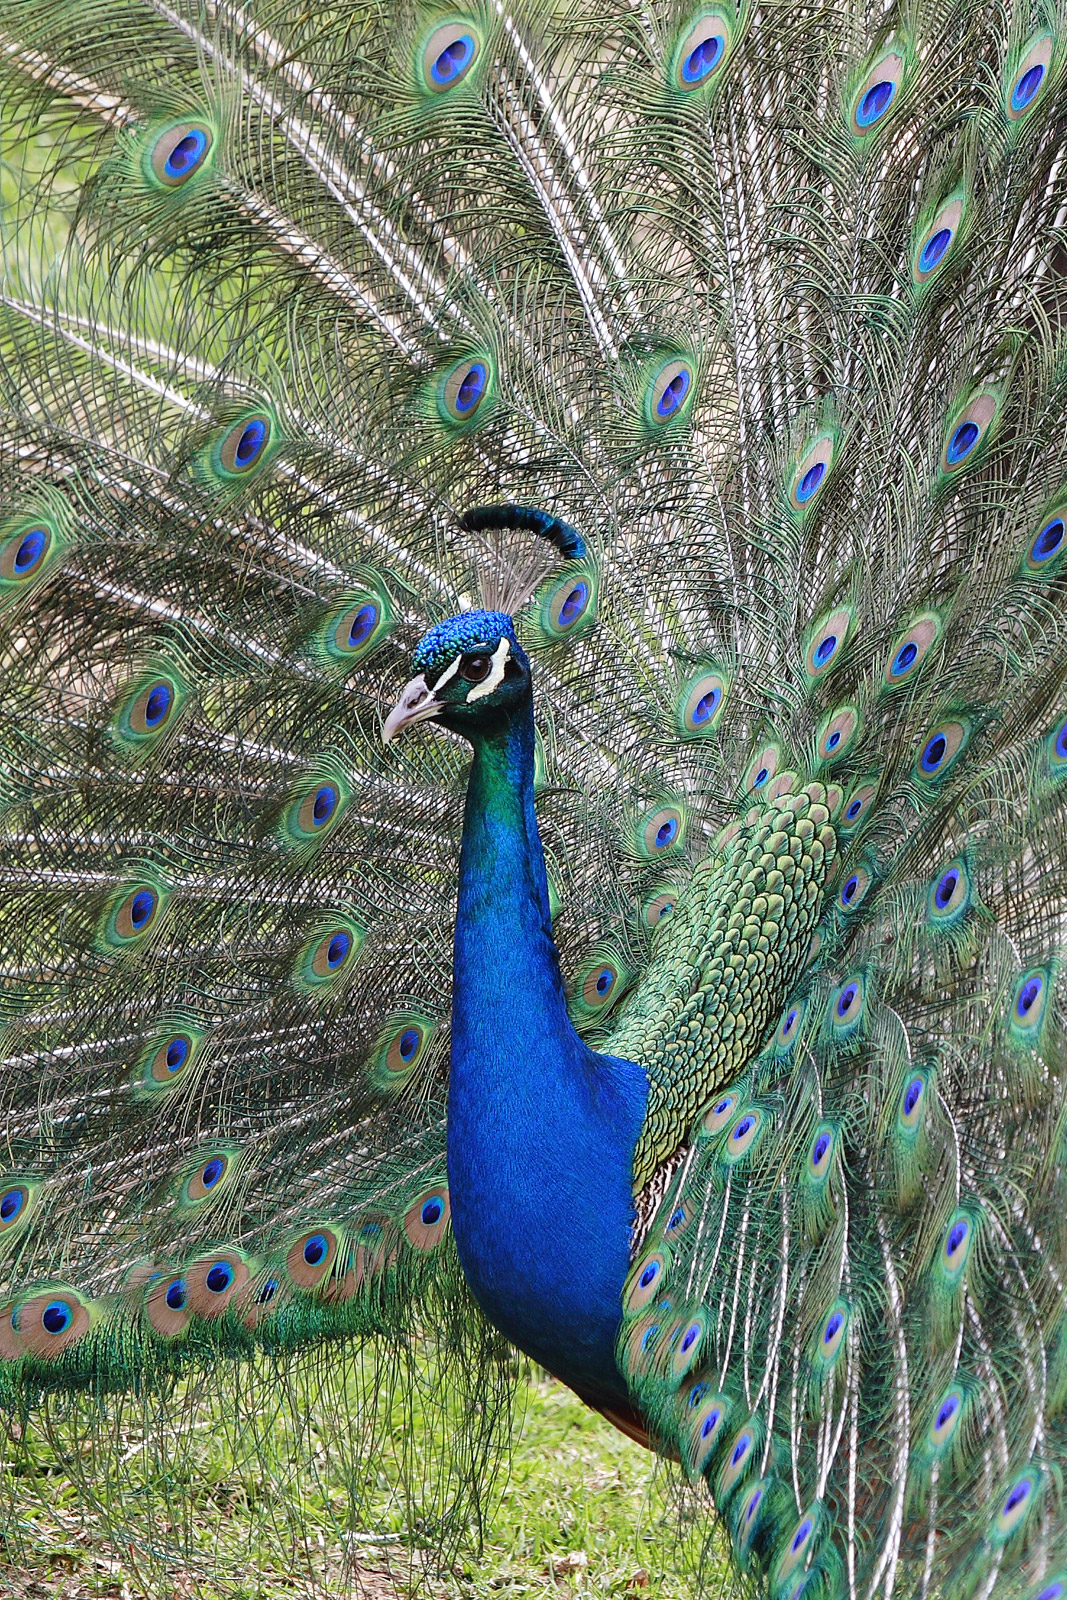 FilePeacock front02 melbourne zoo.jpg Wikipedia